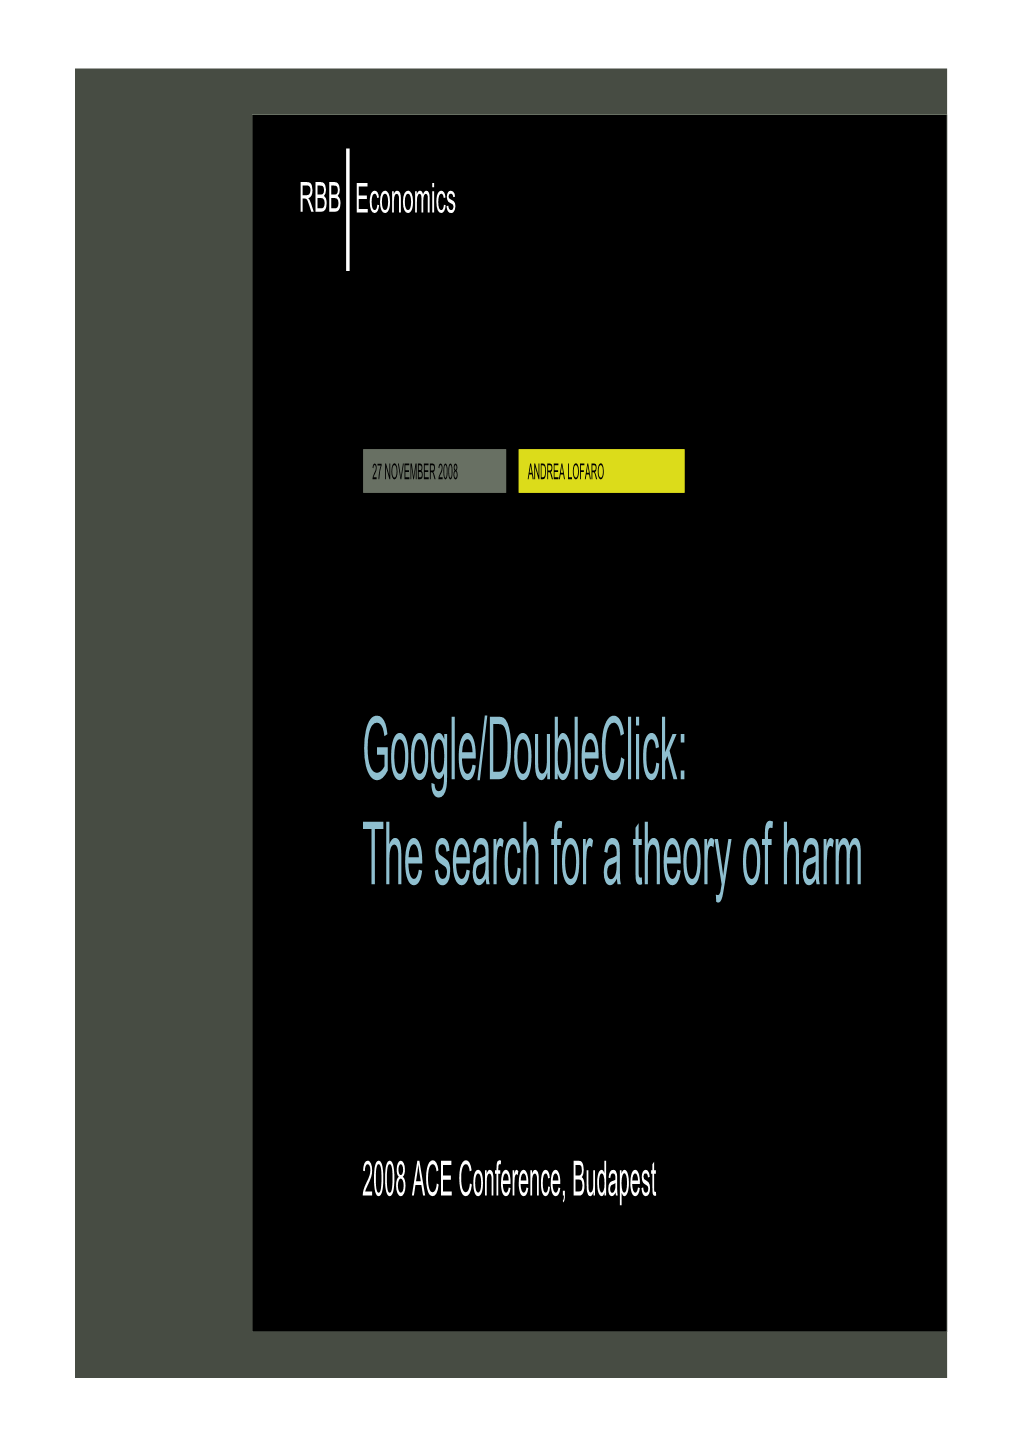 Google/Doubleclick: the Search for a Theory of Harm